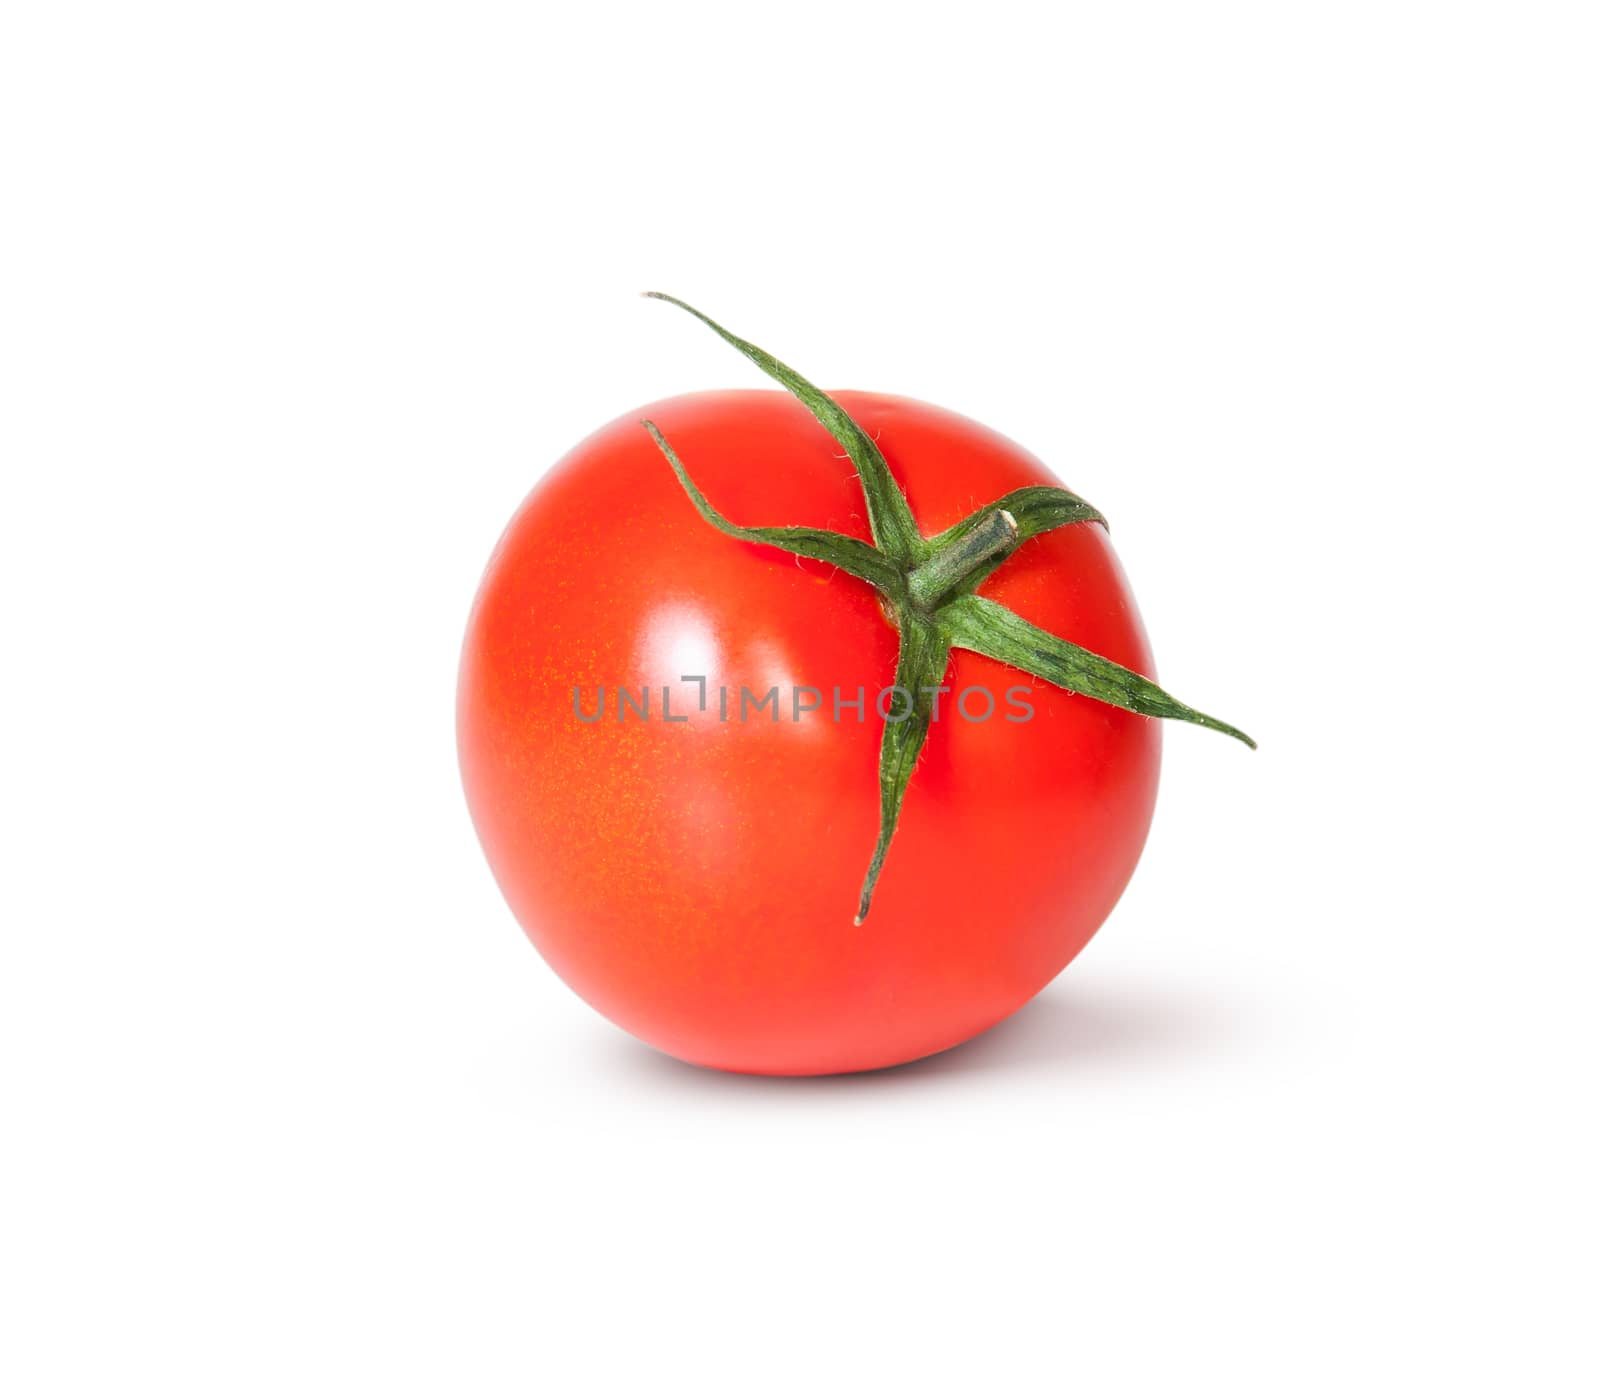 Single Fresh Red Tomato With Green Stem Rotated by Cipariss